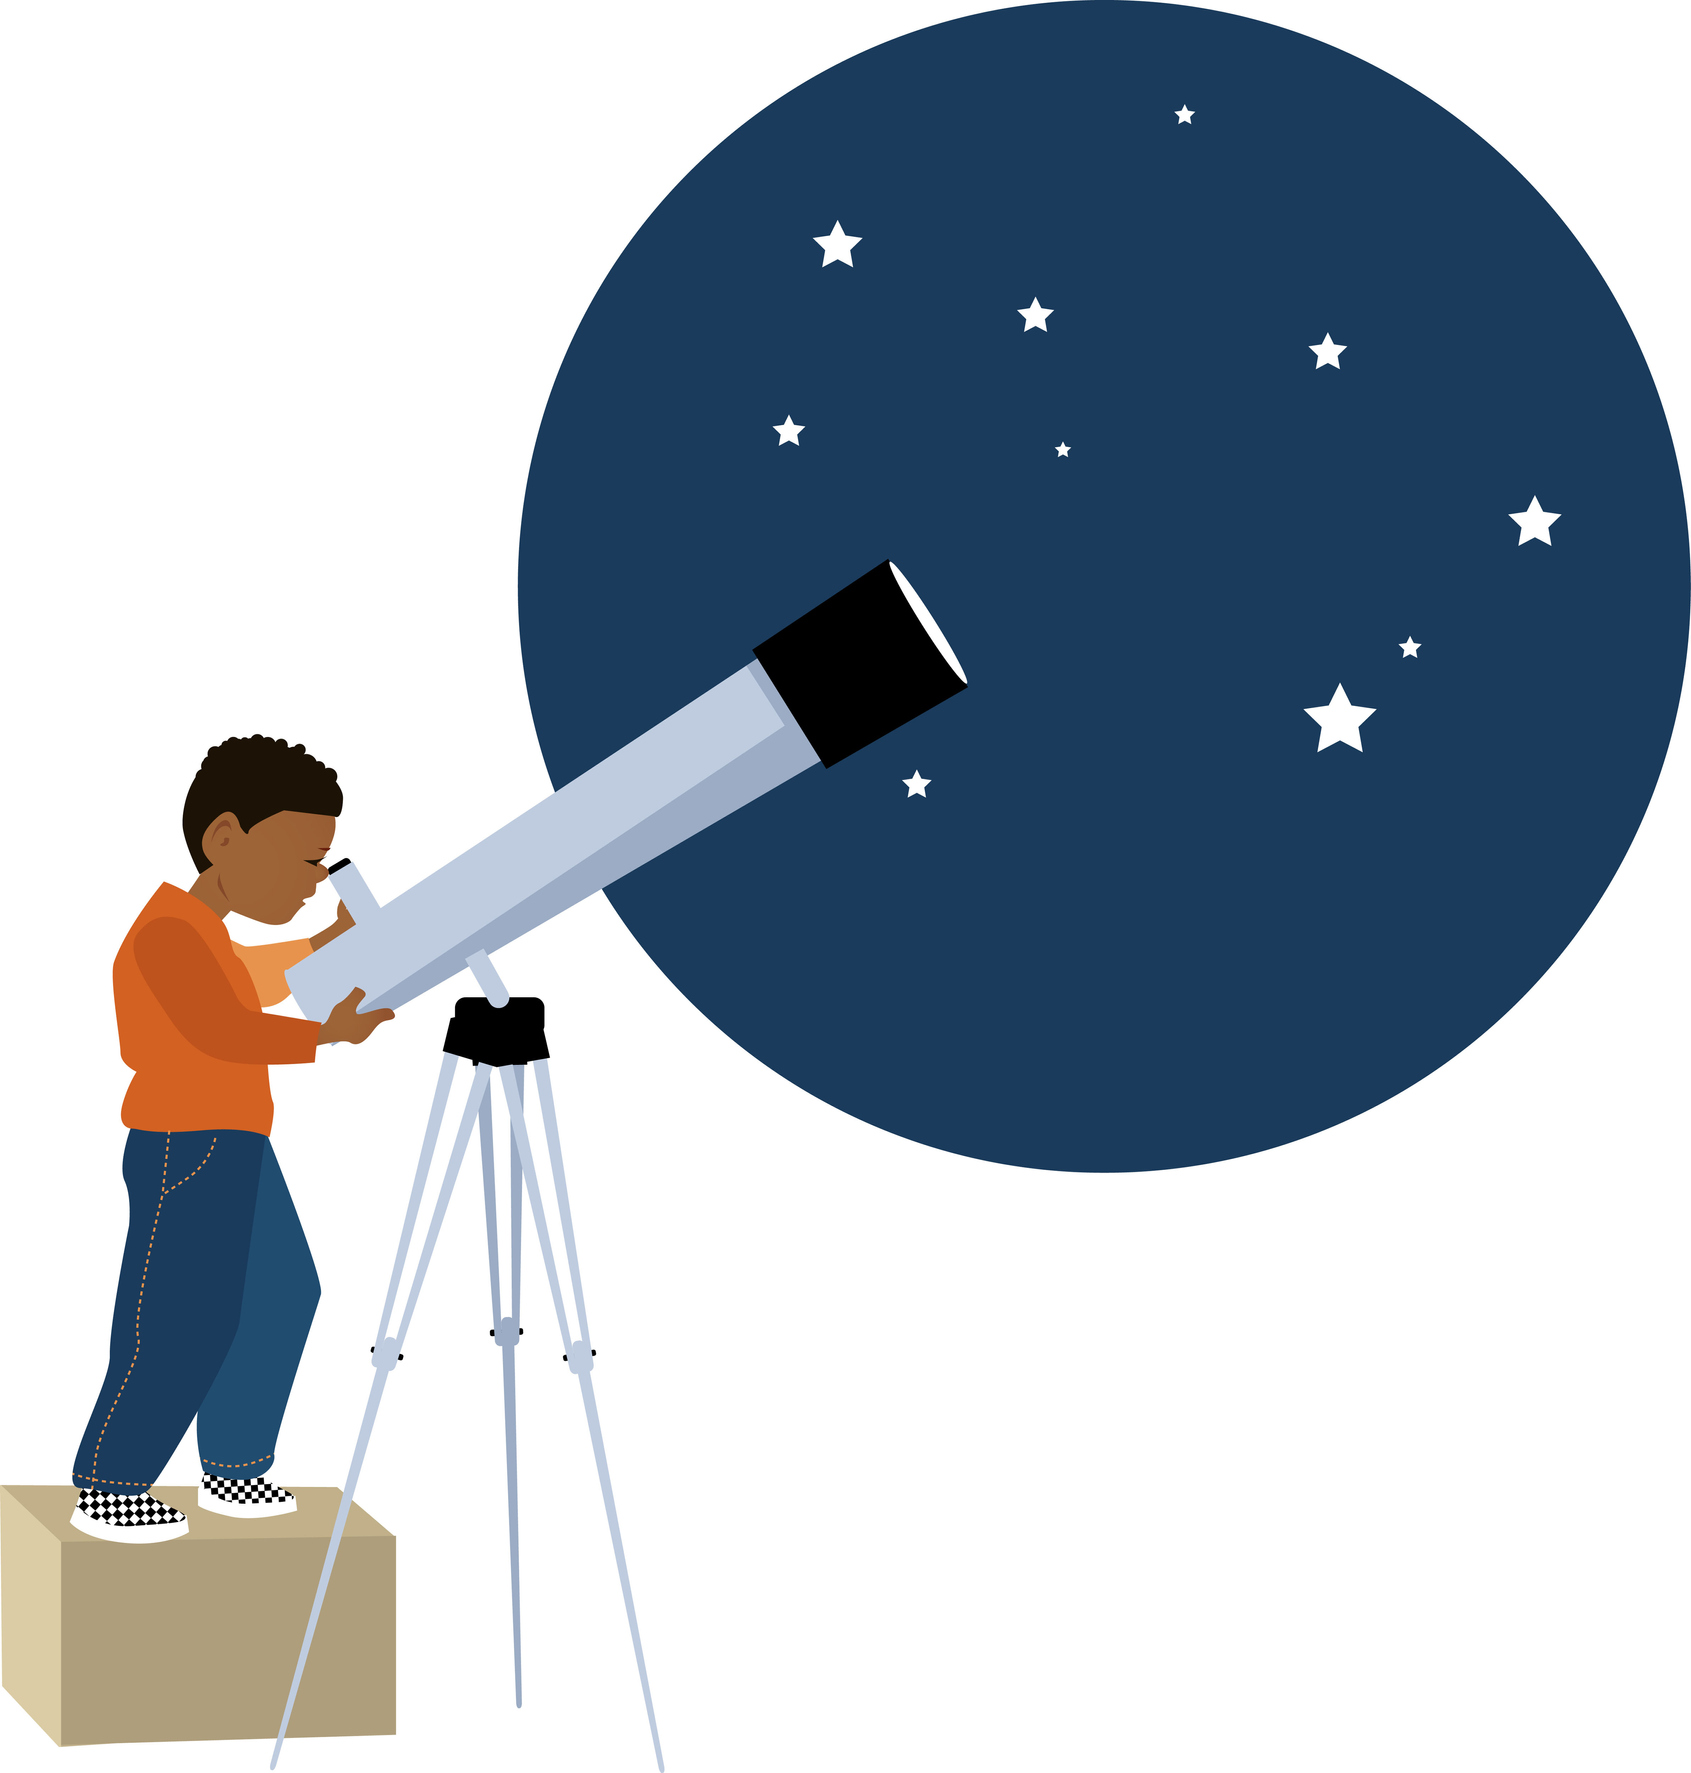 Illustration of a young child standing on a box looking through a telescope at the night sky.